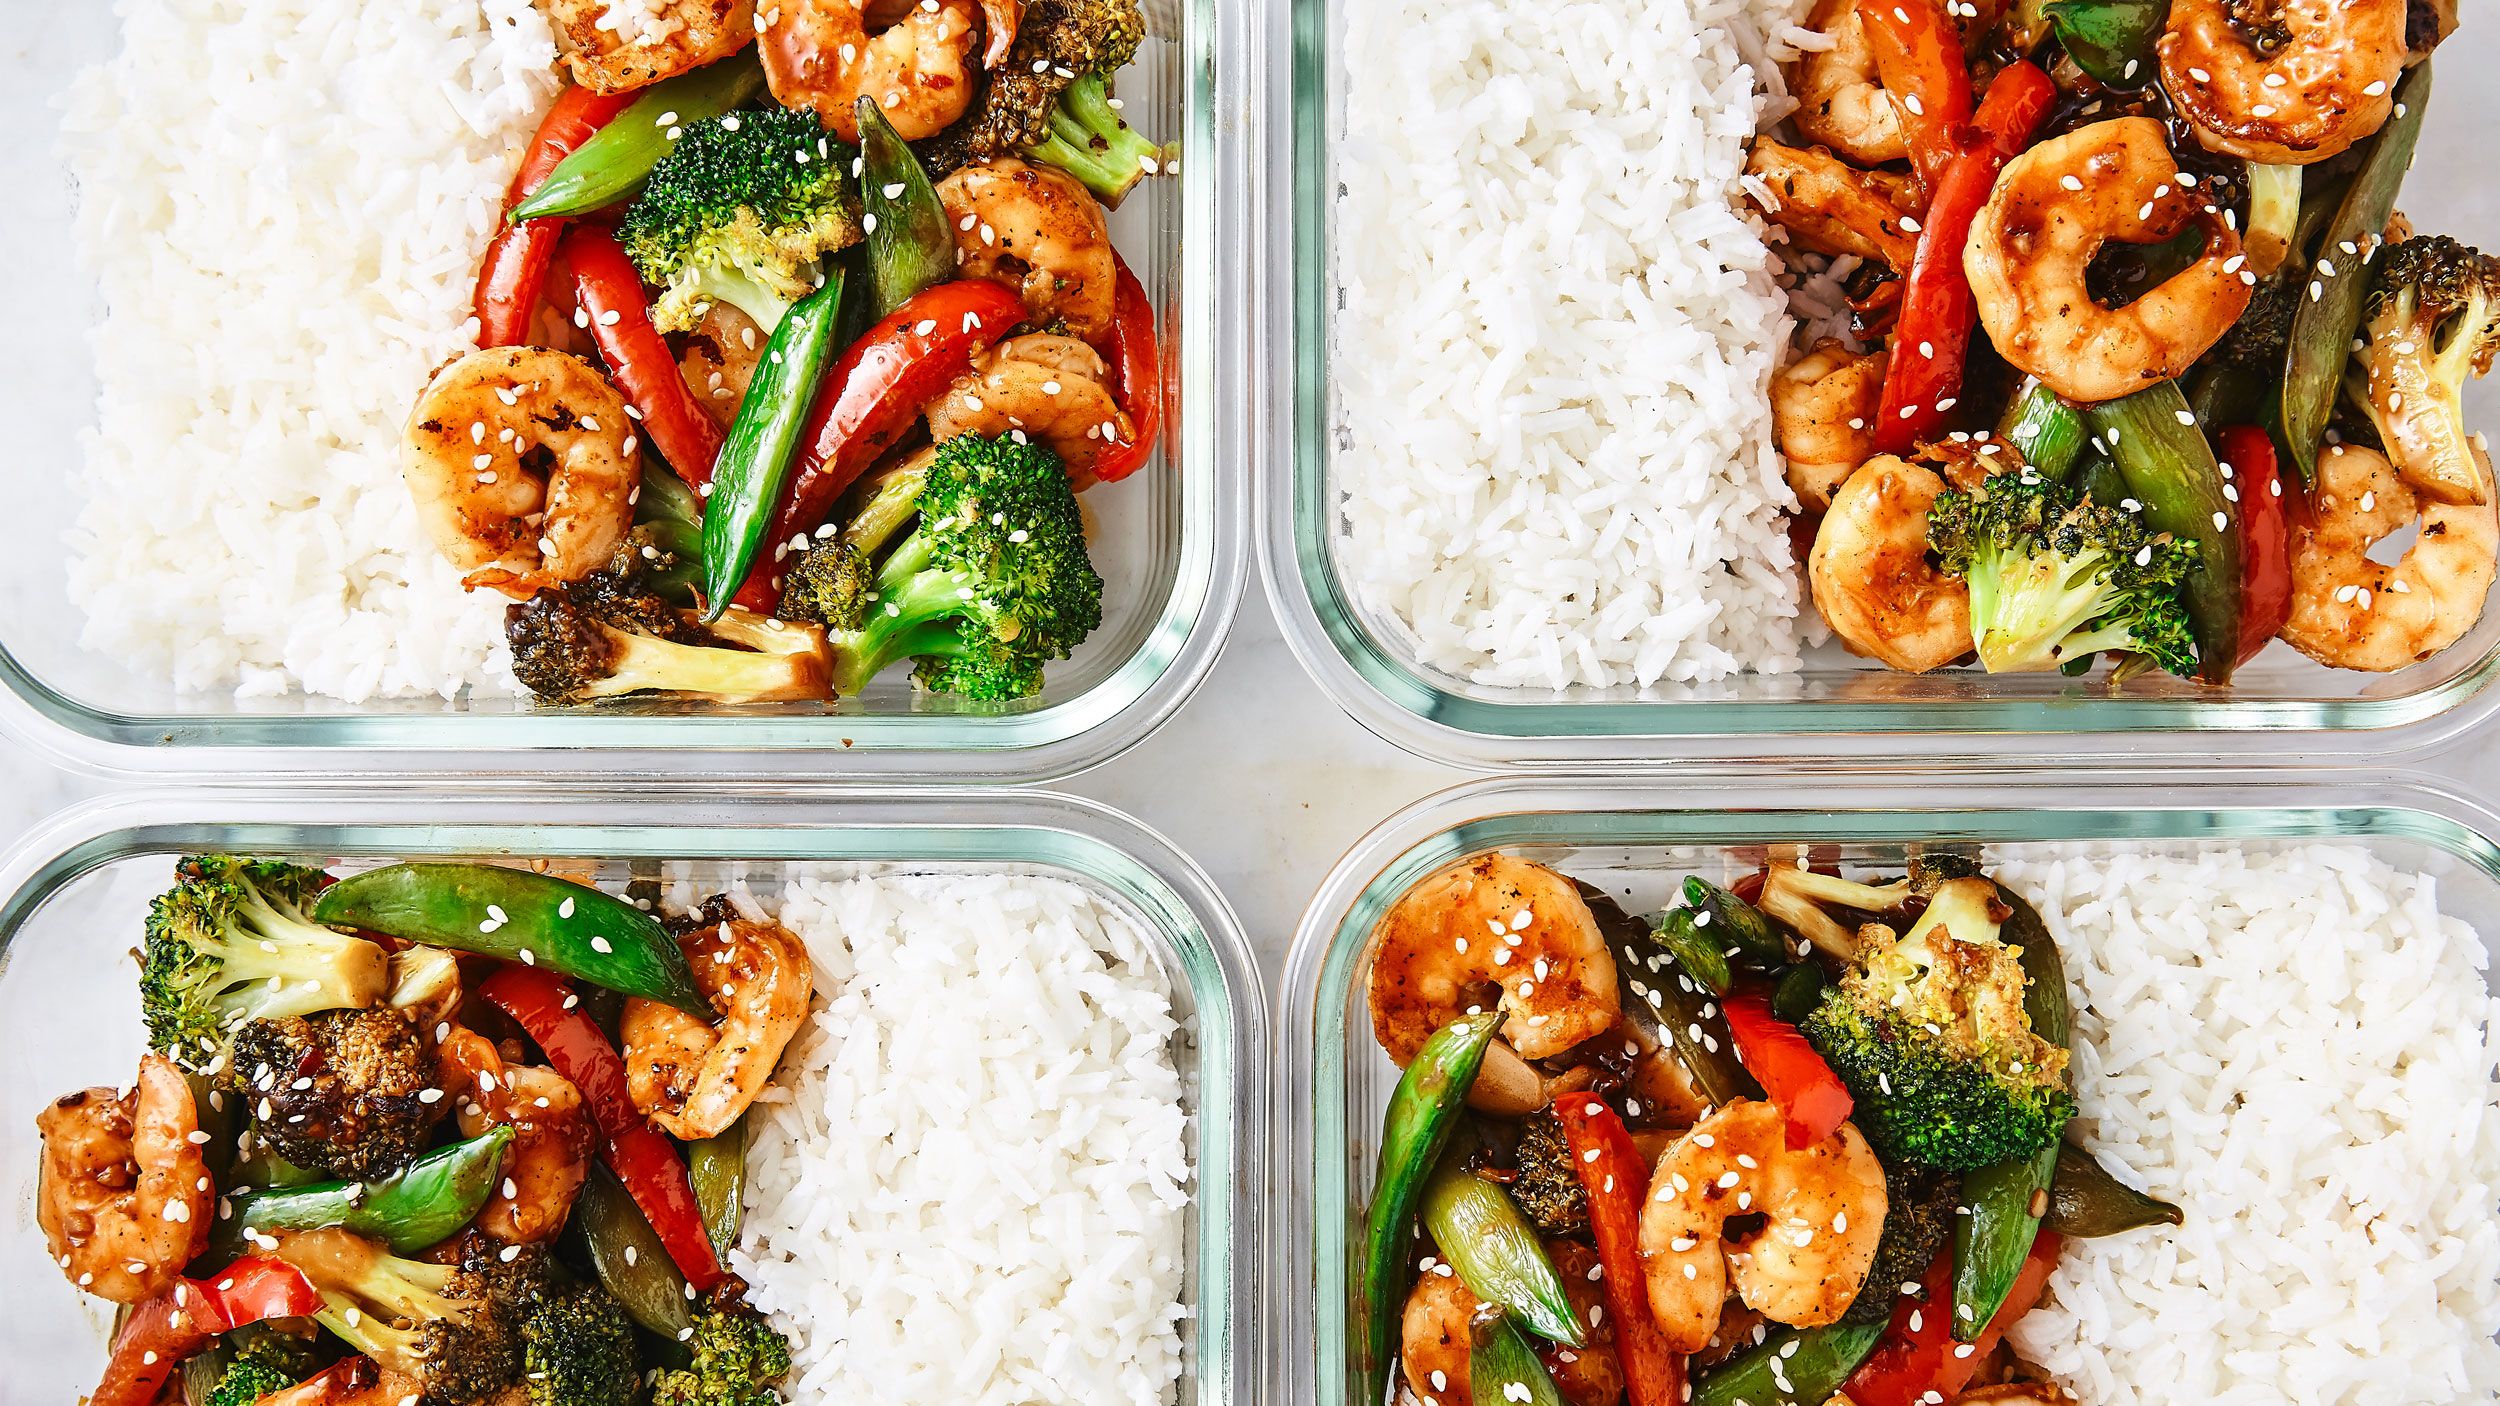 https://hips.hearstapps.com/hmg-prod/images/delish-meal-prep-containers-1545260289.jpg